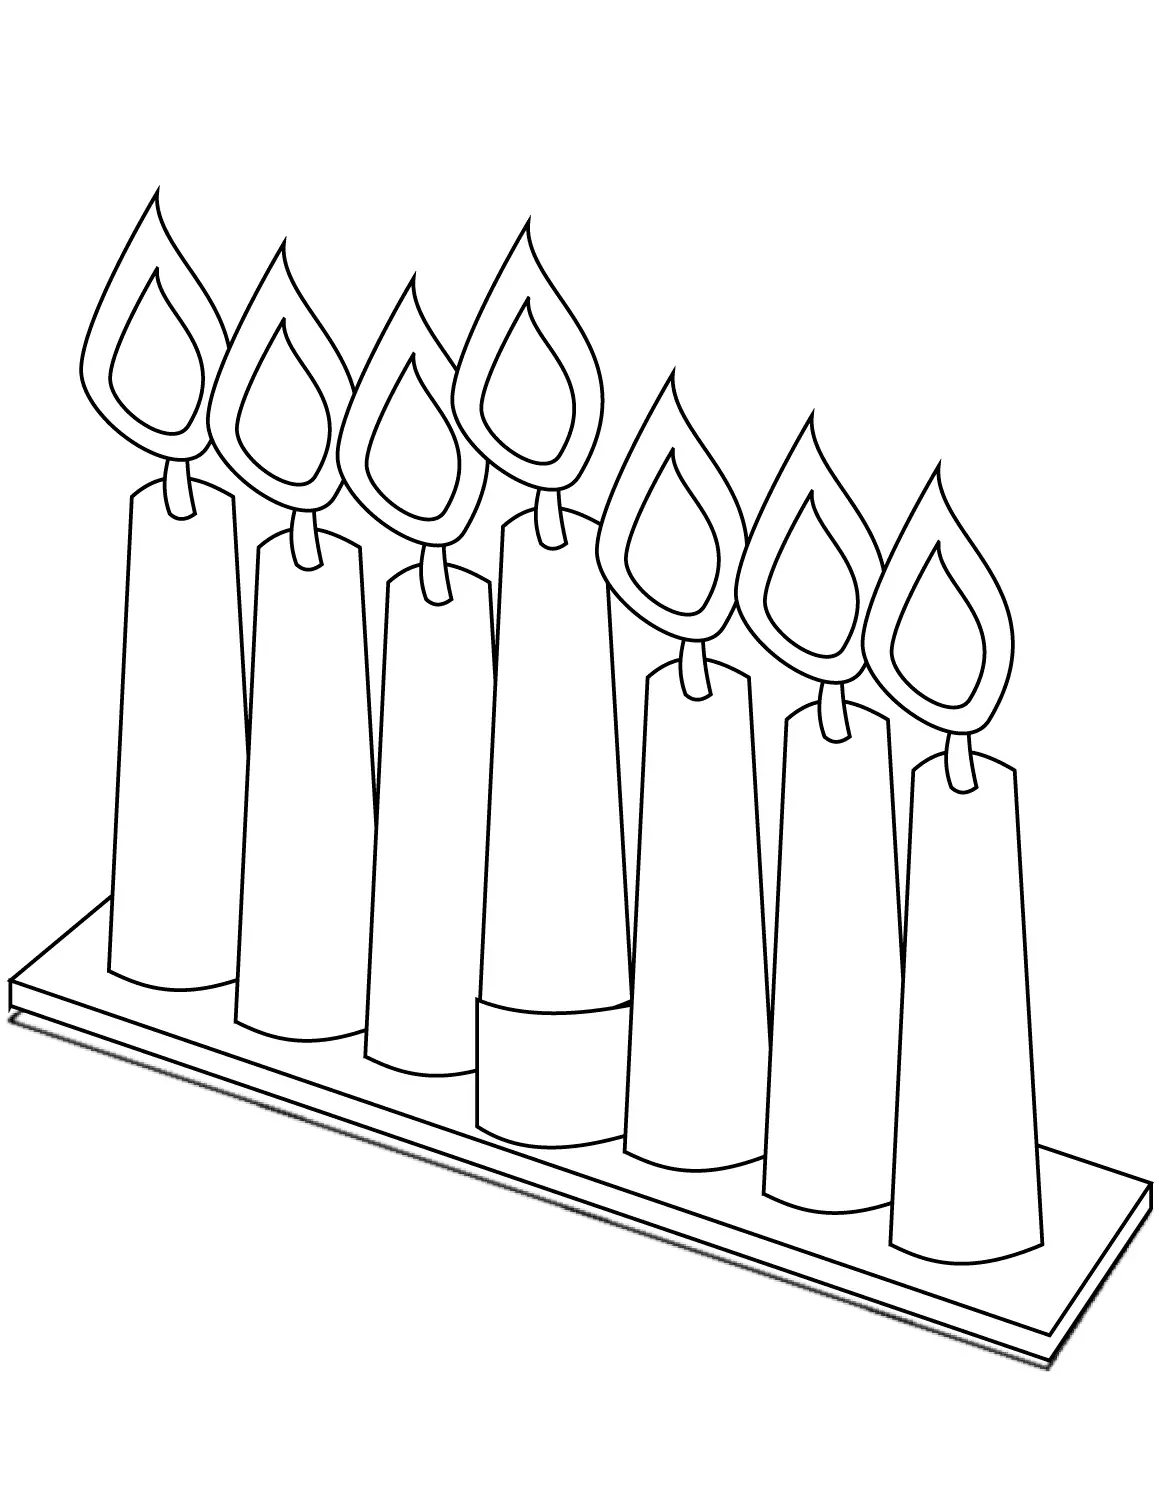 SEVEN CANDLES KWANZAA HOLIDAY Free Clipart Coloring Pages for Kids Adults Art Activities Line Art